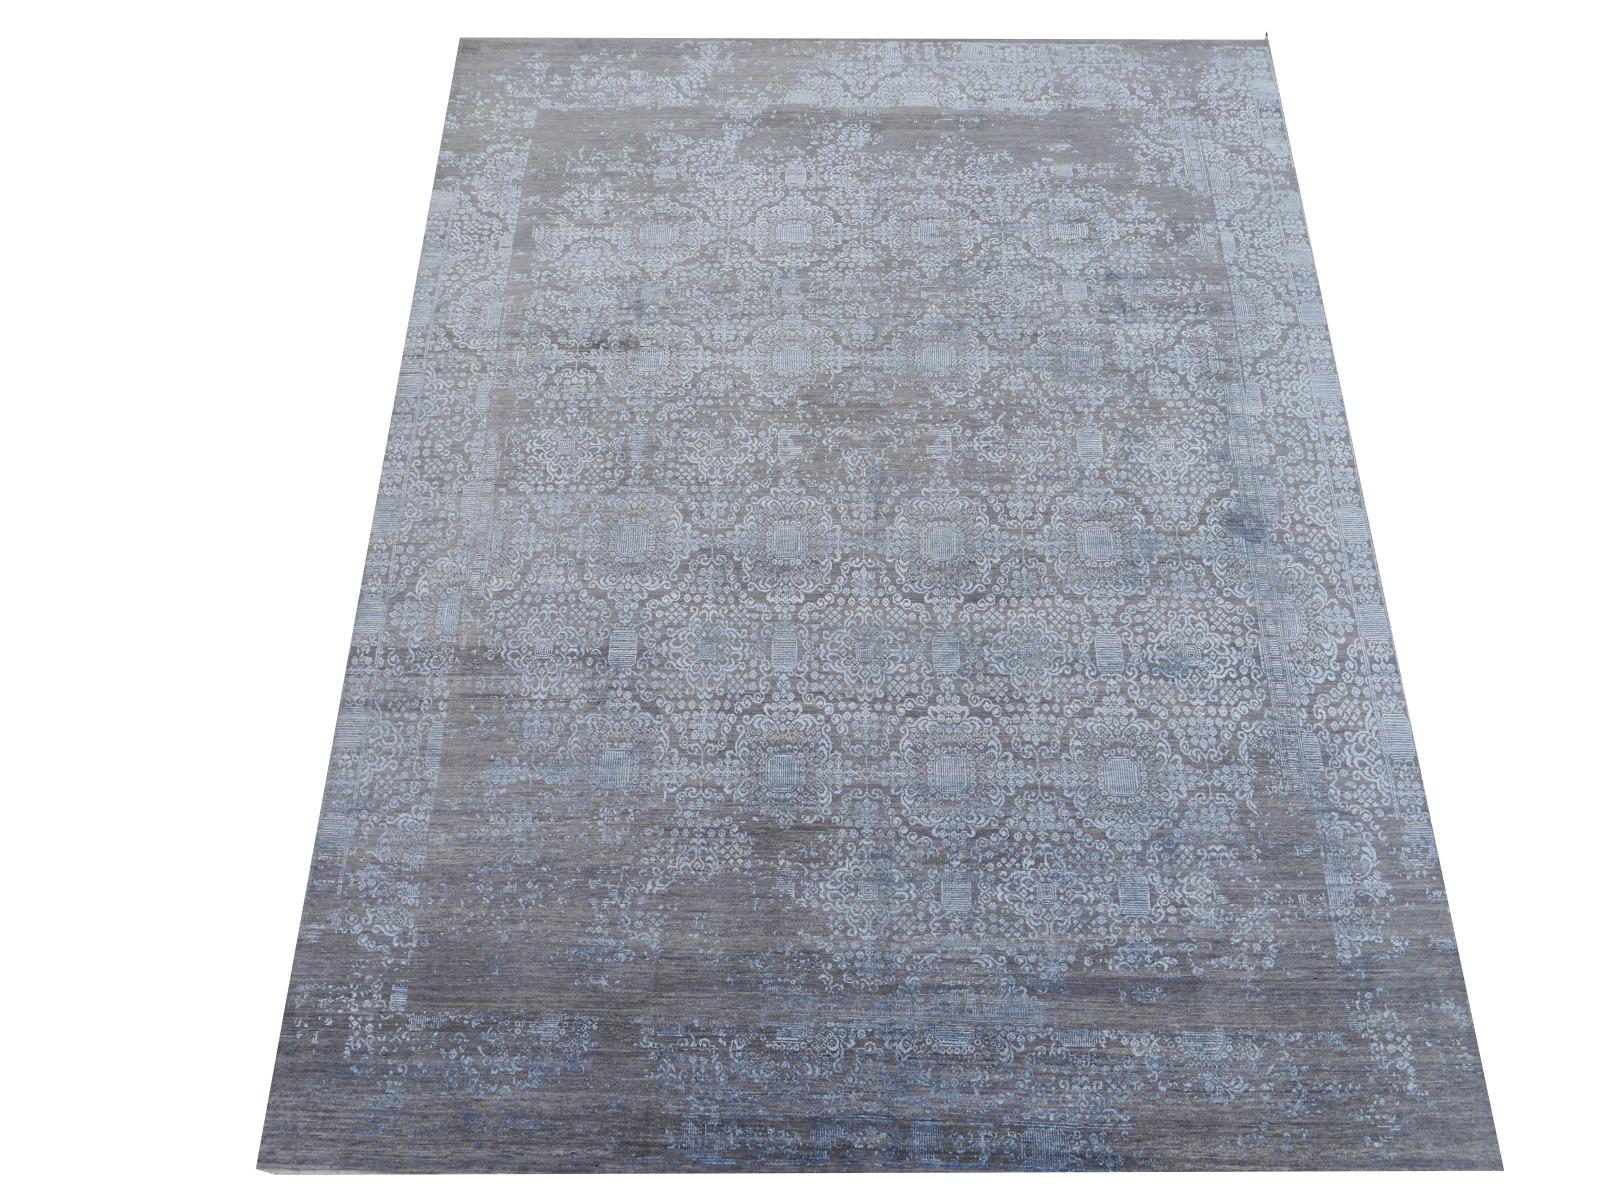 A beautiful new 21st century design carpet, hand knotted using finest highland wool and bamboo silk. 
Construction
This artwork has a pile made of hand spun natural dyed Wool (plant dyes). The rug is very dense and has a pile height of about 0.5